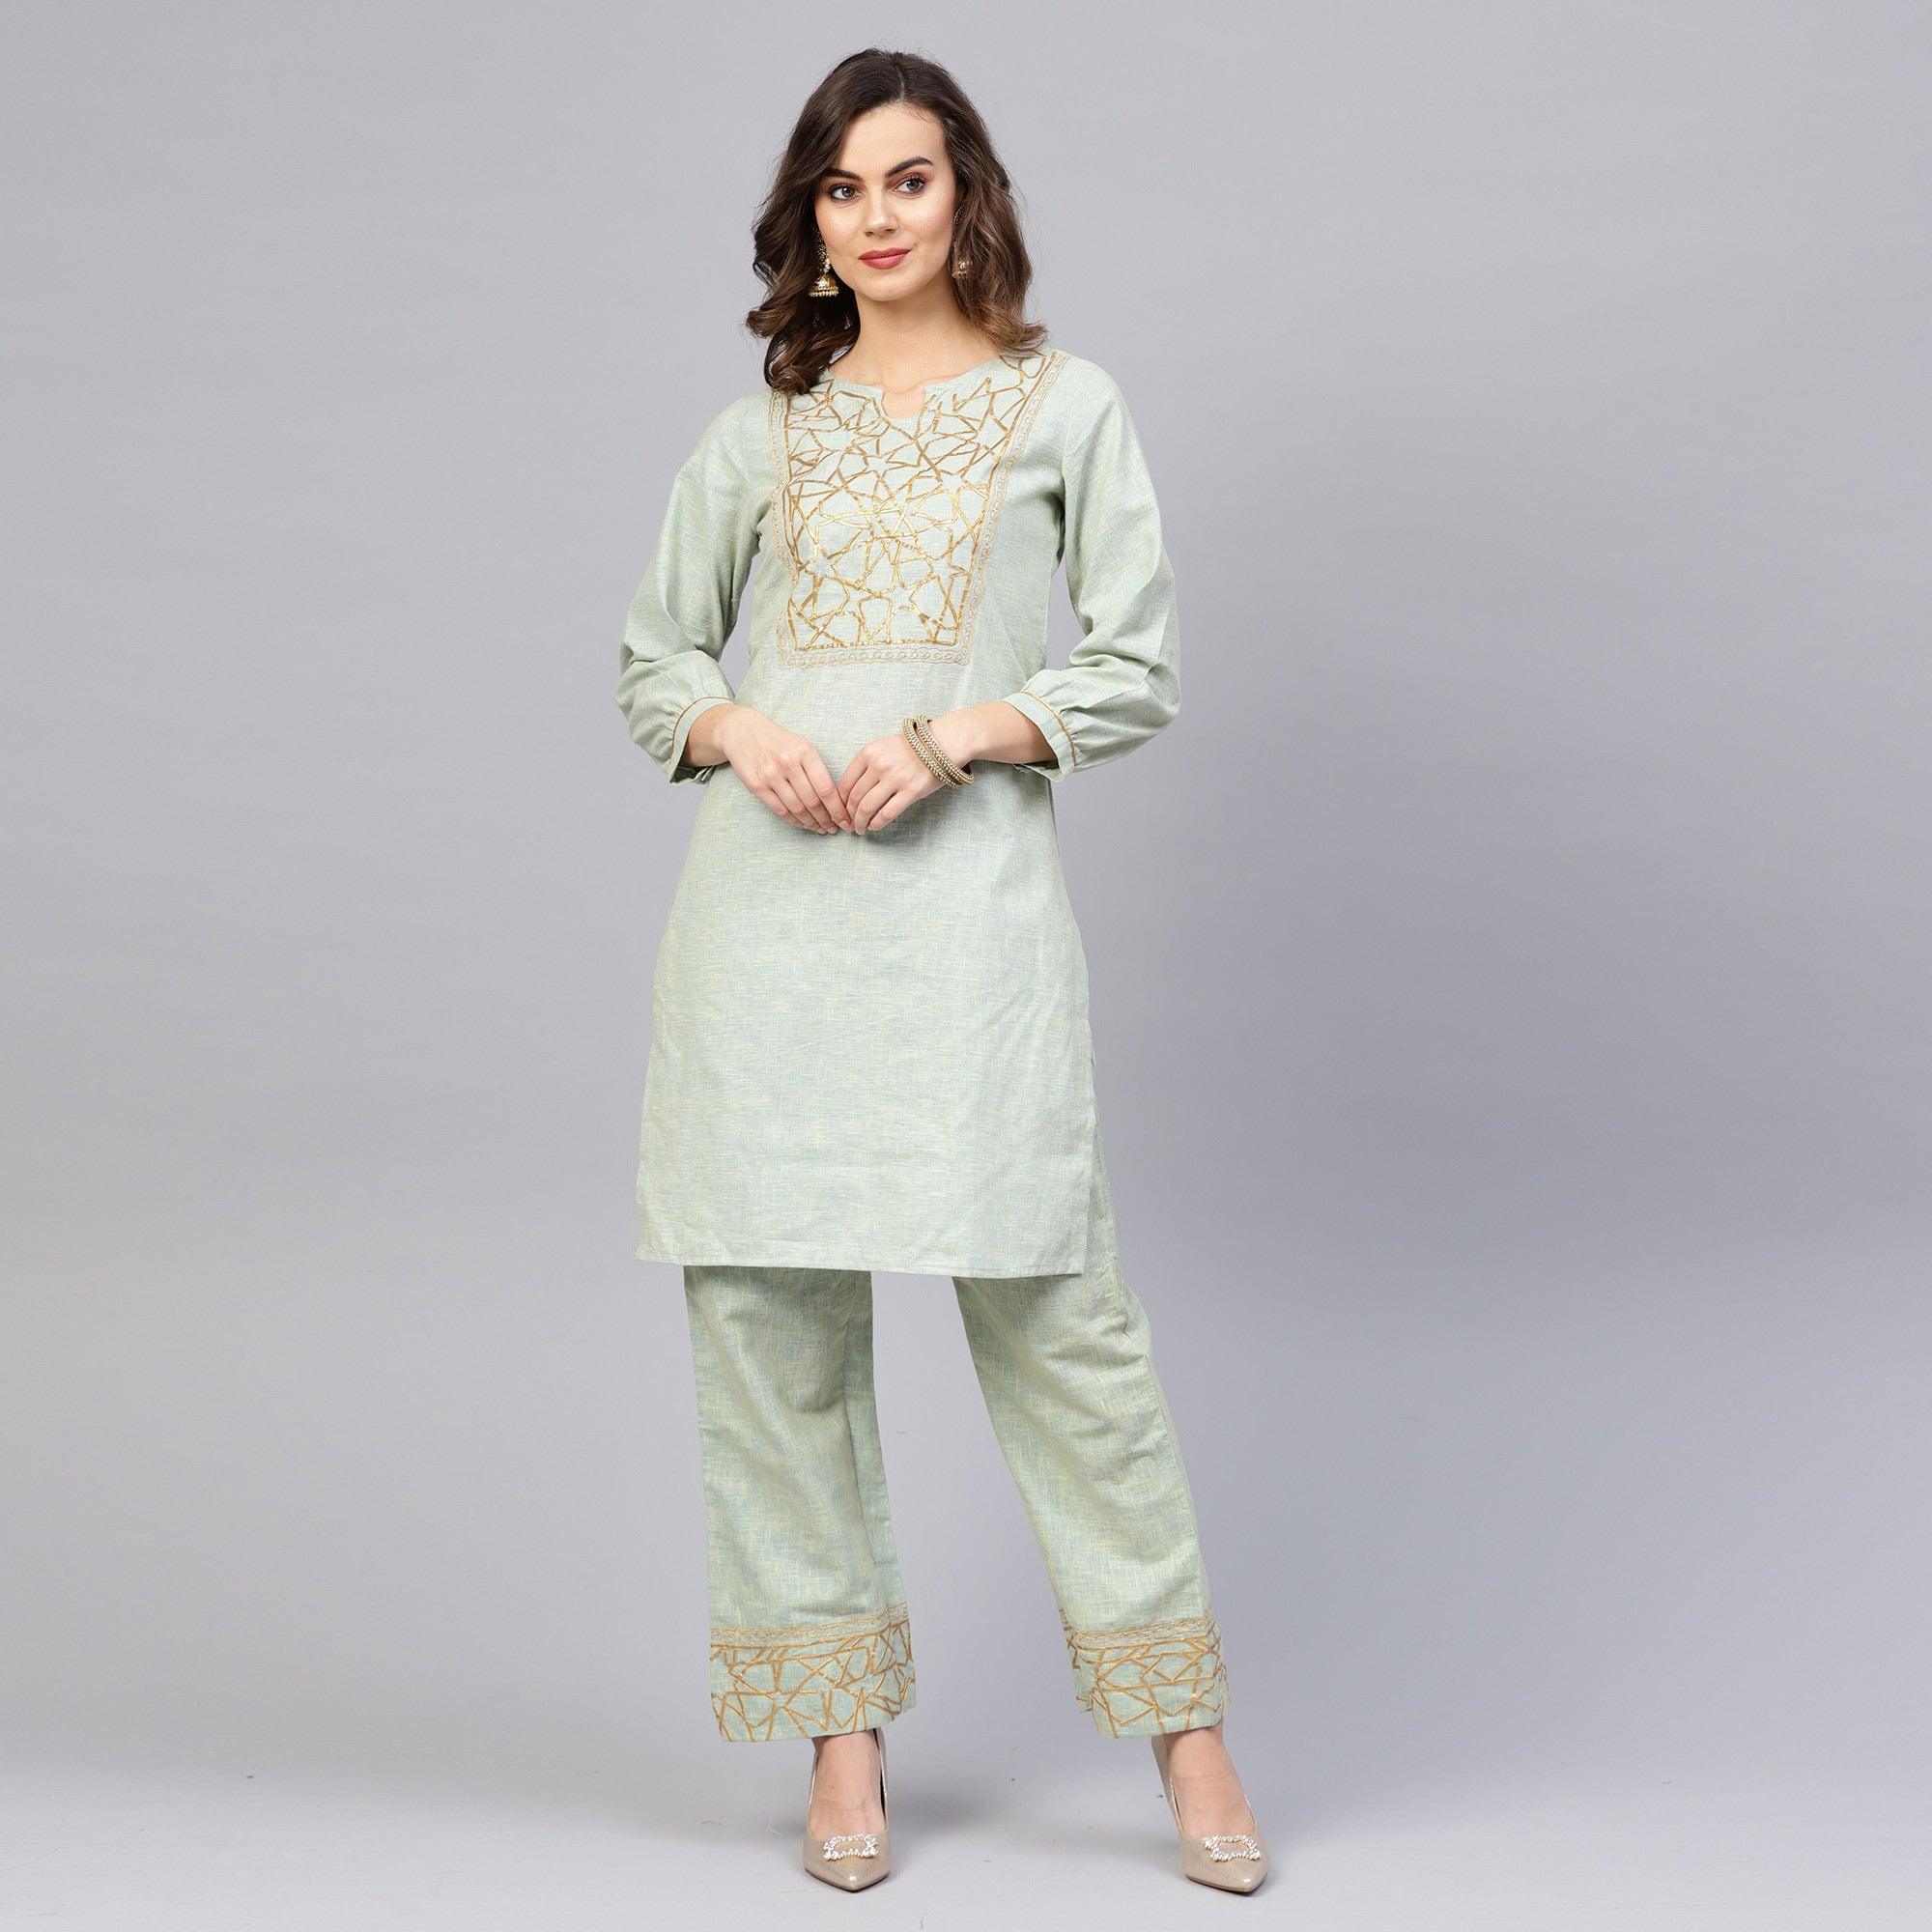 Delightful Pista Green Colored Party Wear Embroidered Cotton Kurti-Pant Set - Peachmode